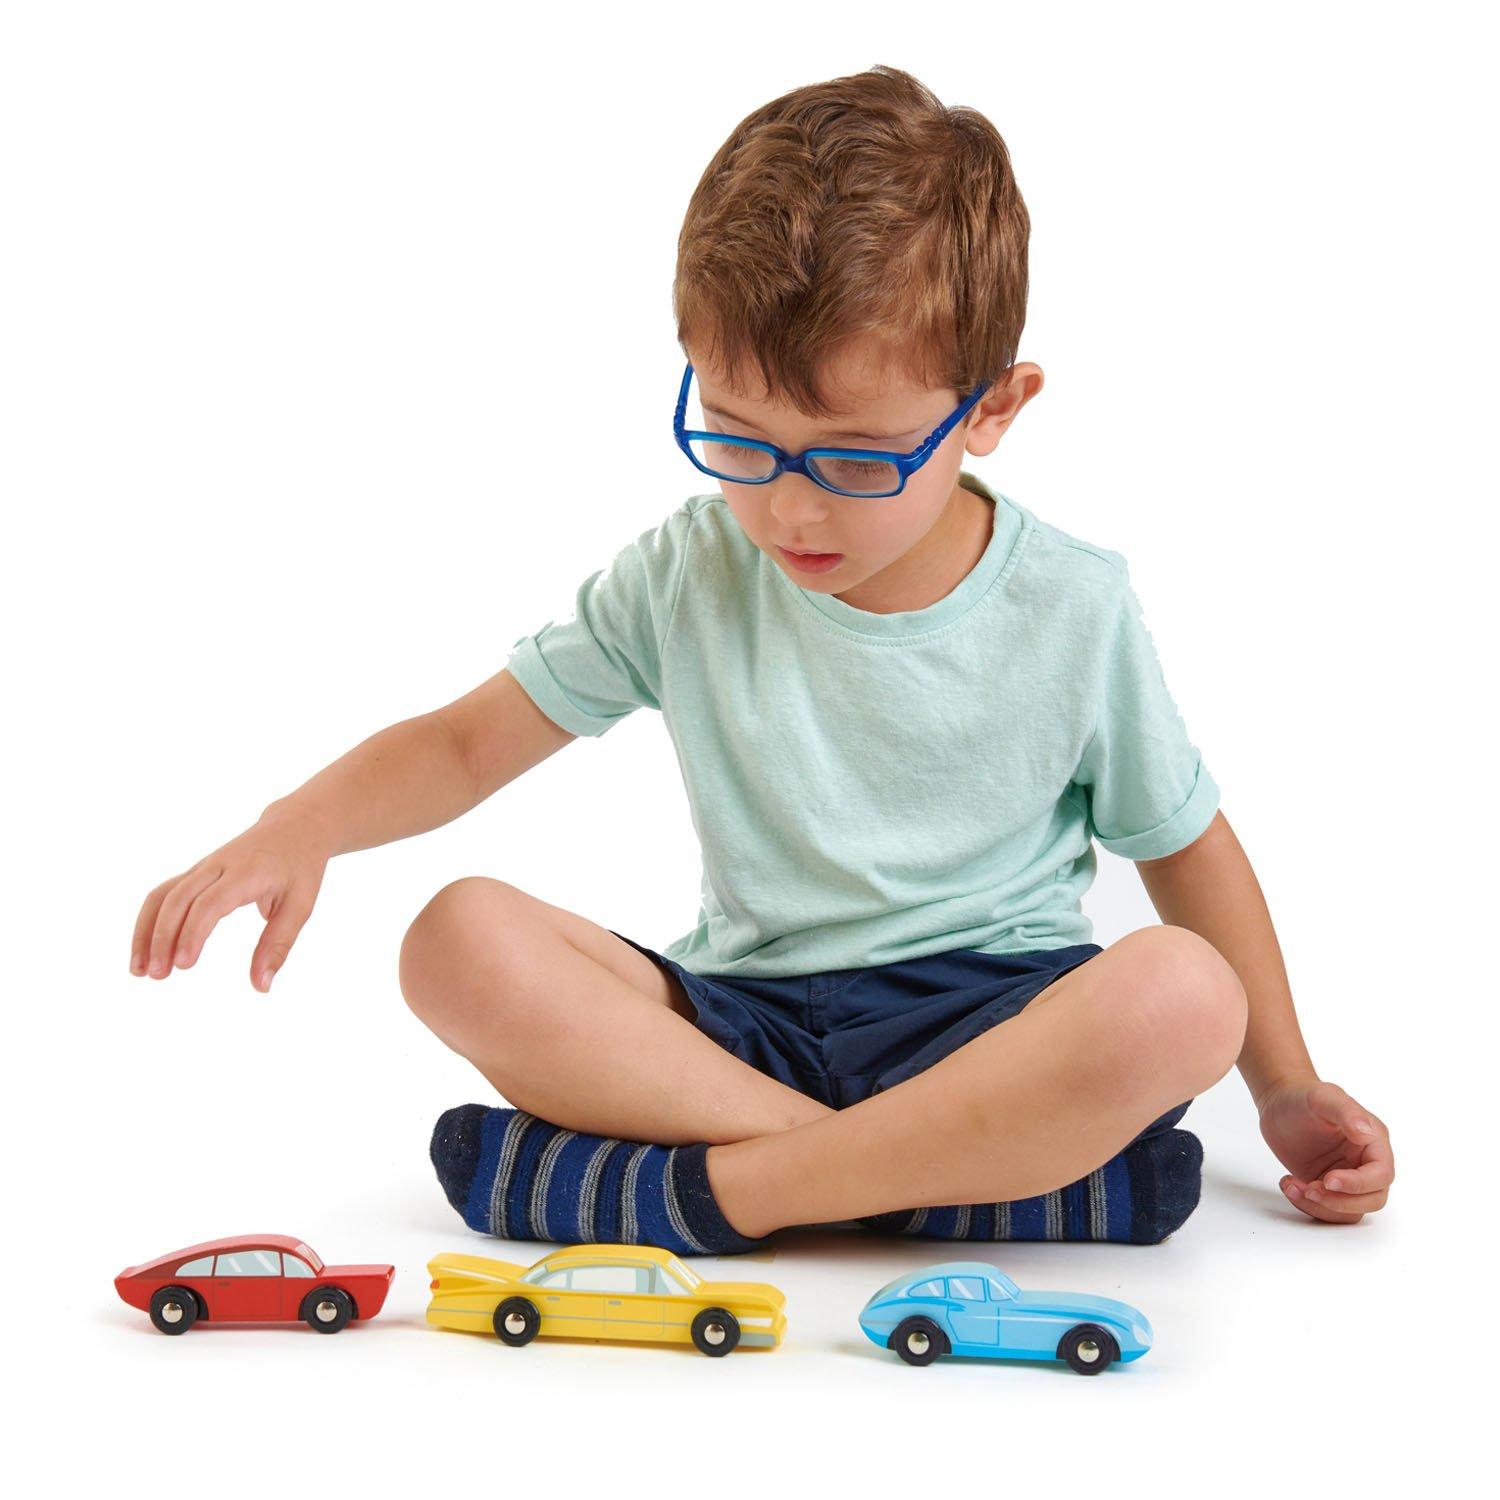 New Stylish Wooden Retro Toy Cars - Set of 3 in Red, Blue and Yellow #1